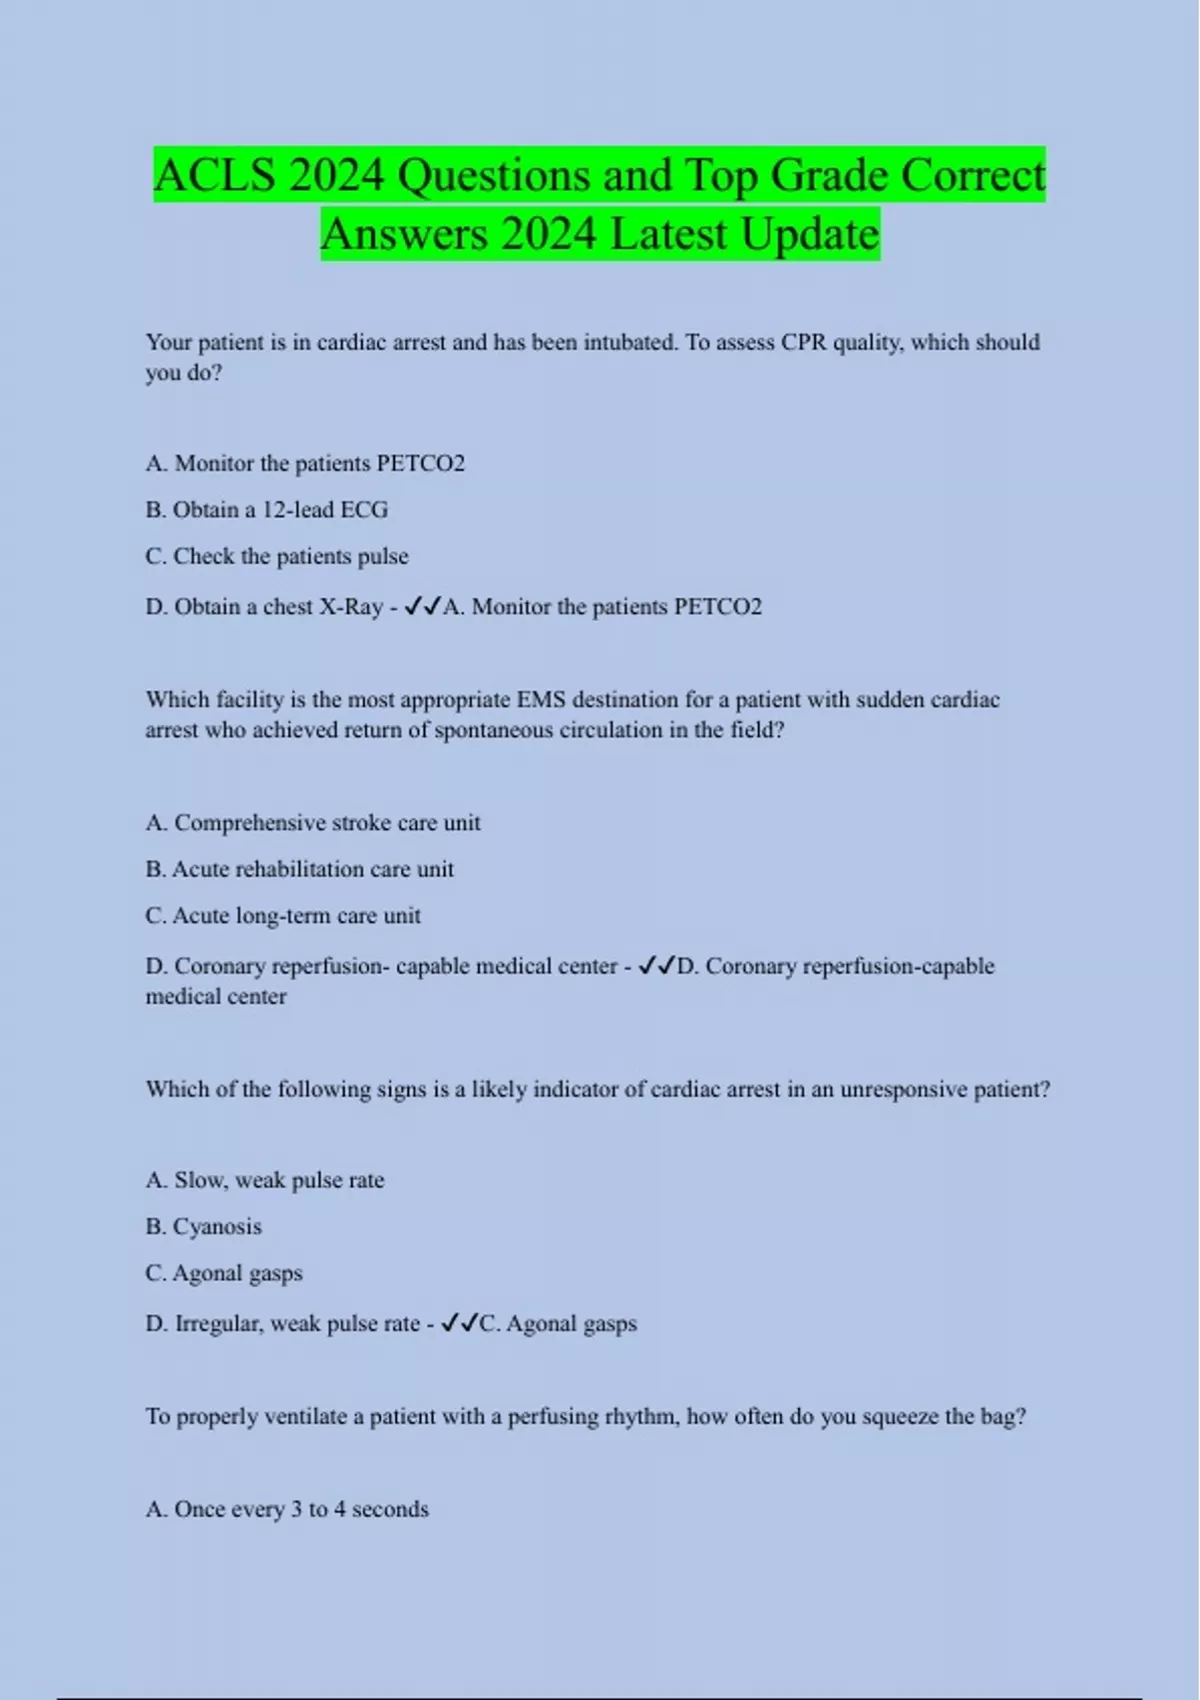 ACLS 2024 Questions and Top Grade Correct Answers 2024 Latest Update